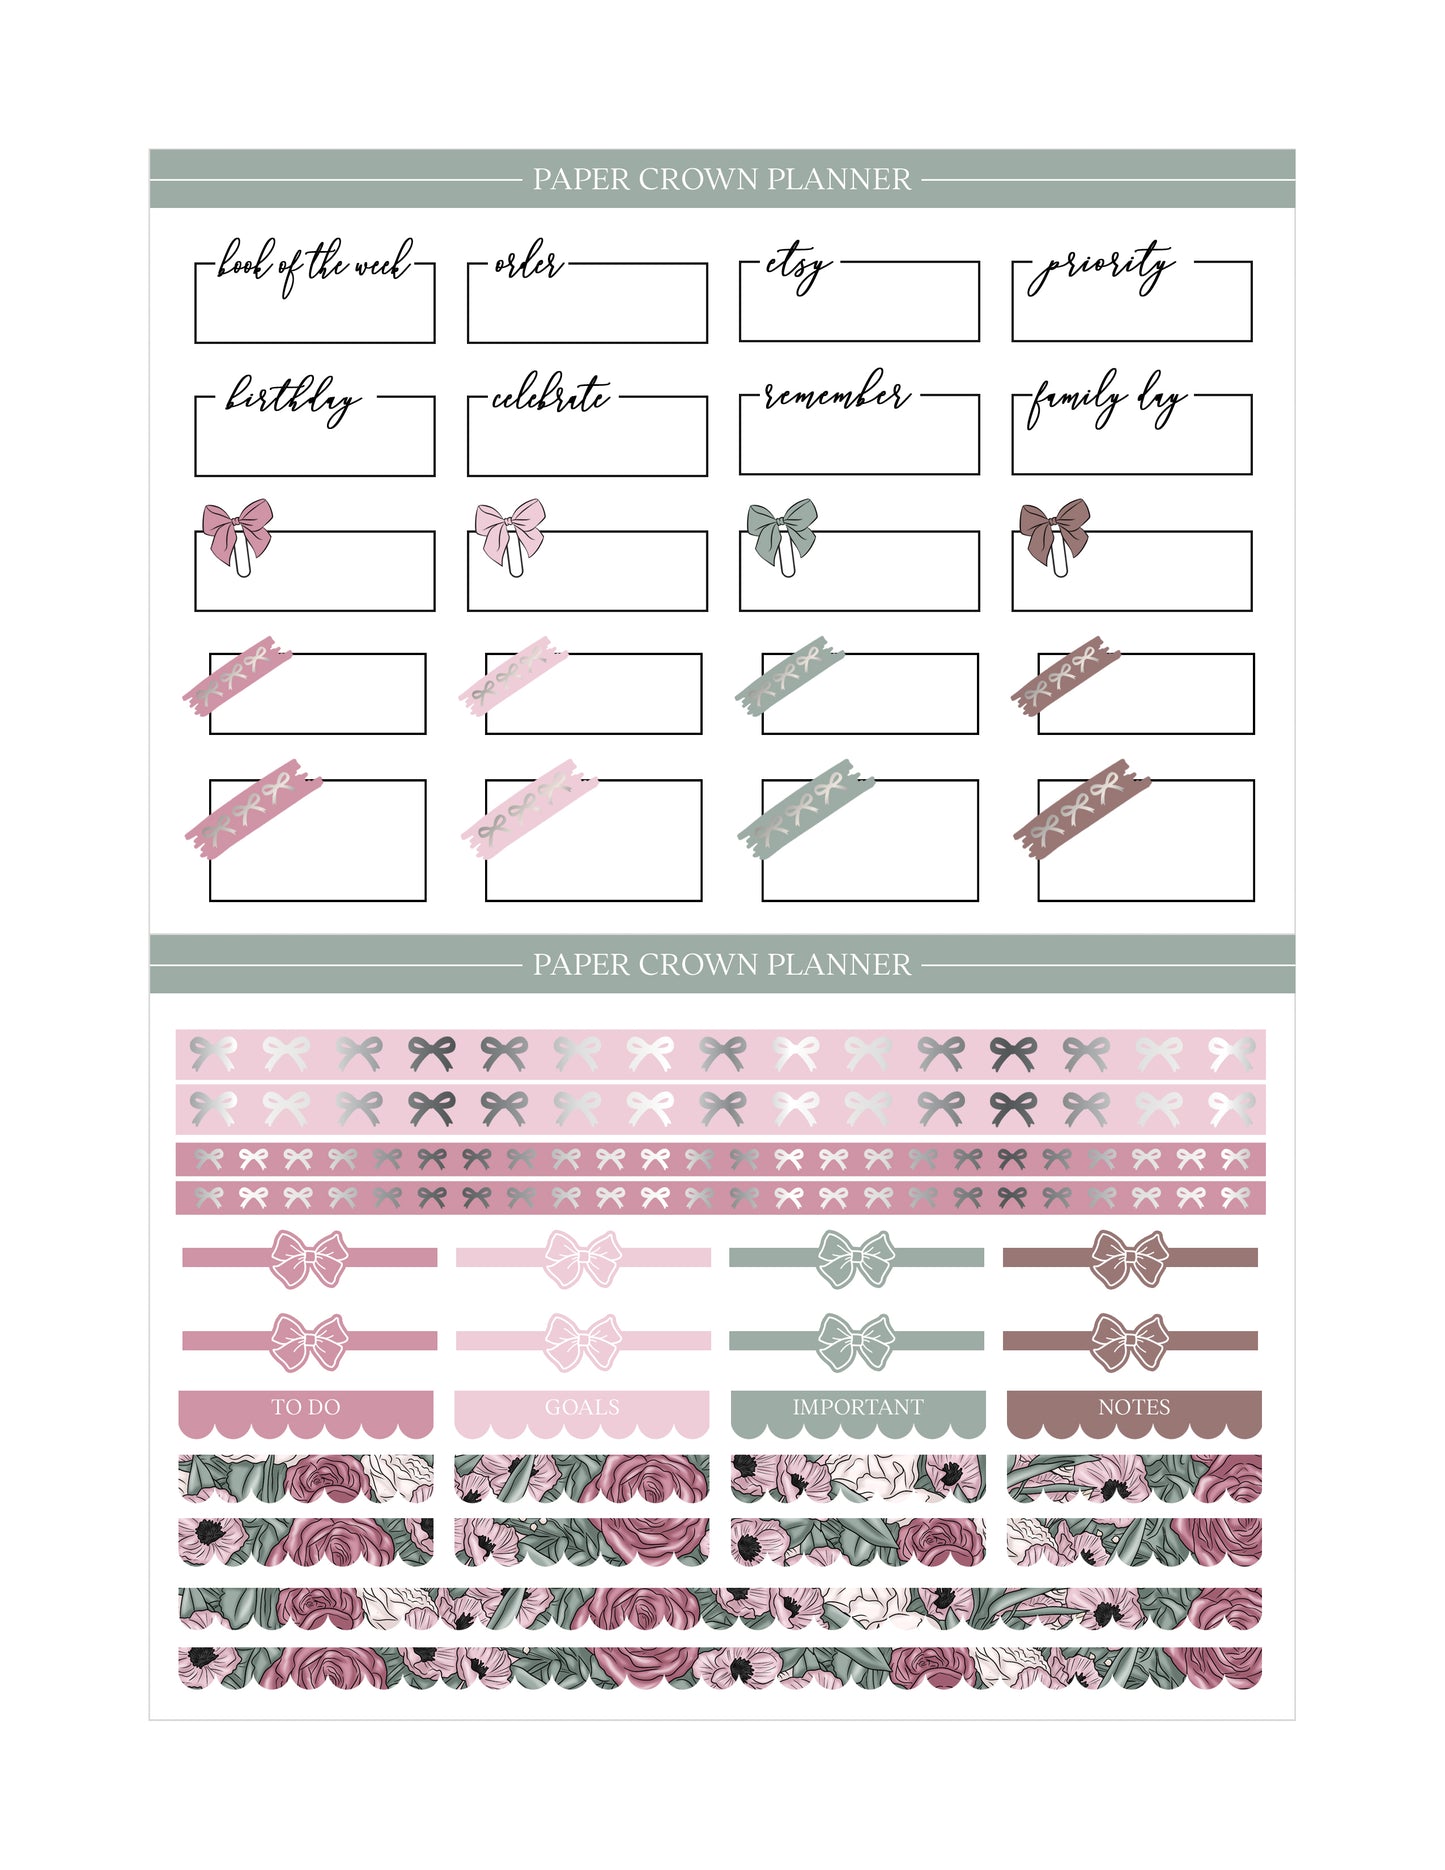 I DO // weekly Planner Stickers